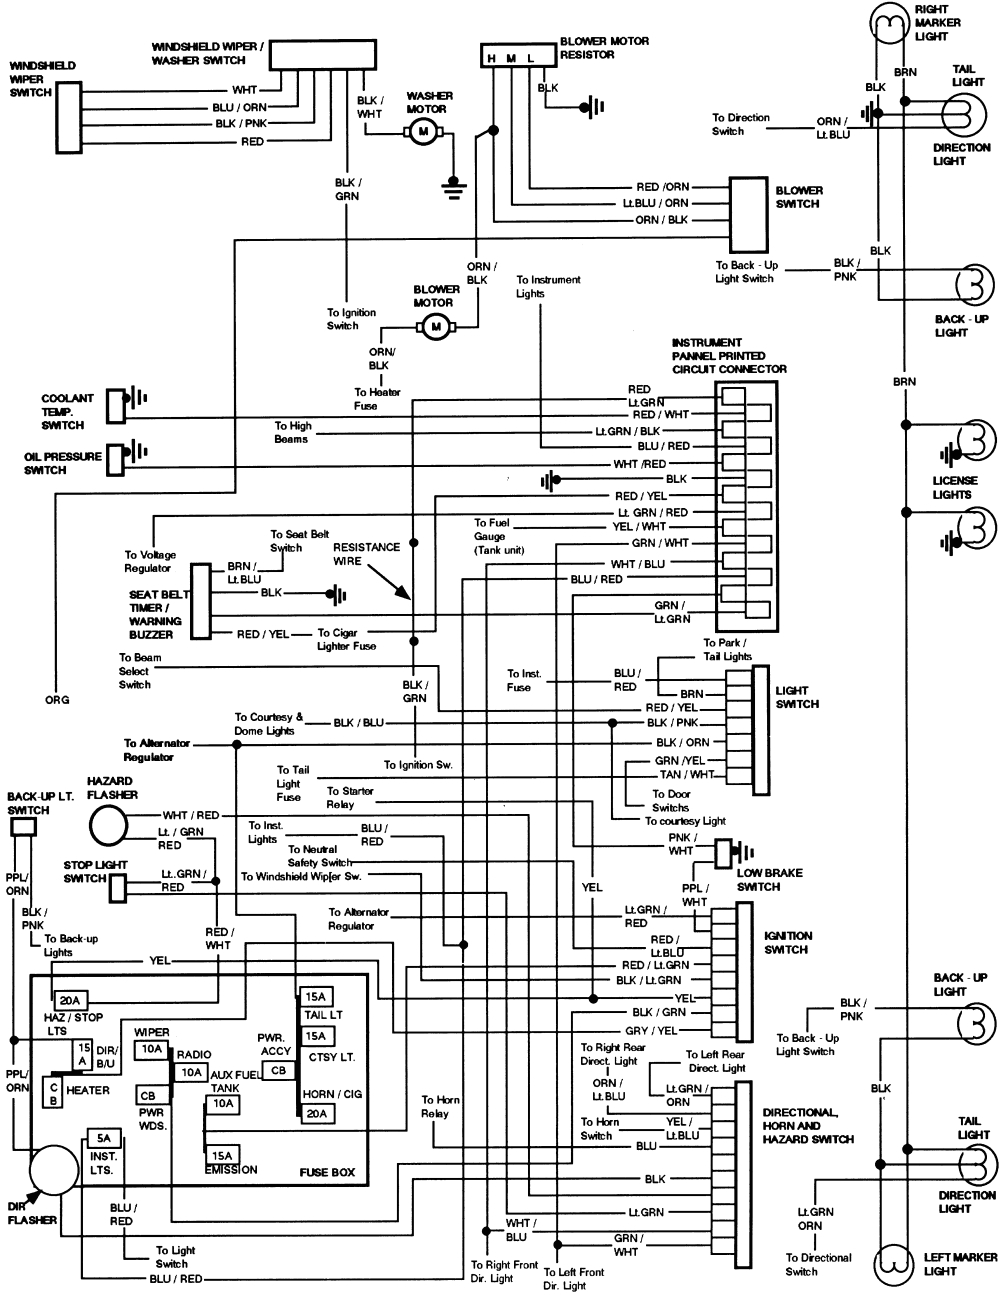 wiring diagram for 1986 ford f250 wiring diagram note 1986 ford f250 fuel pump wiring diagram 1986 ford f250 wiring diagram